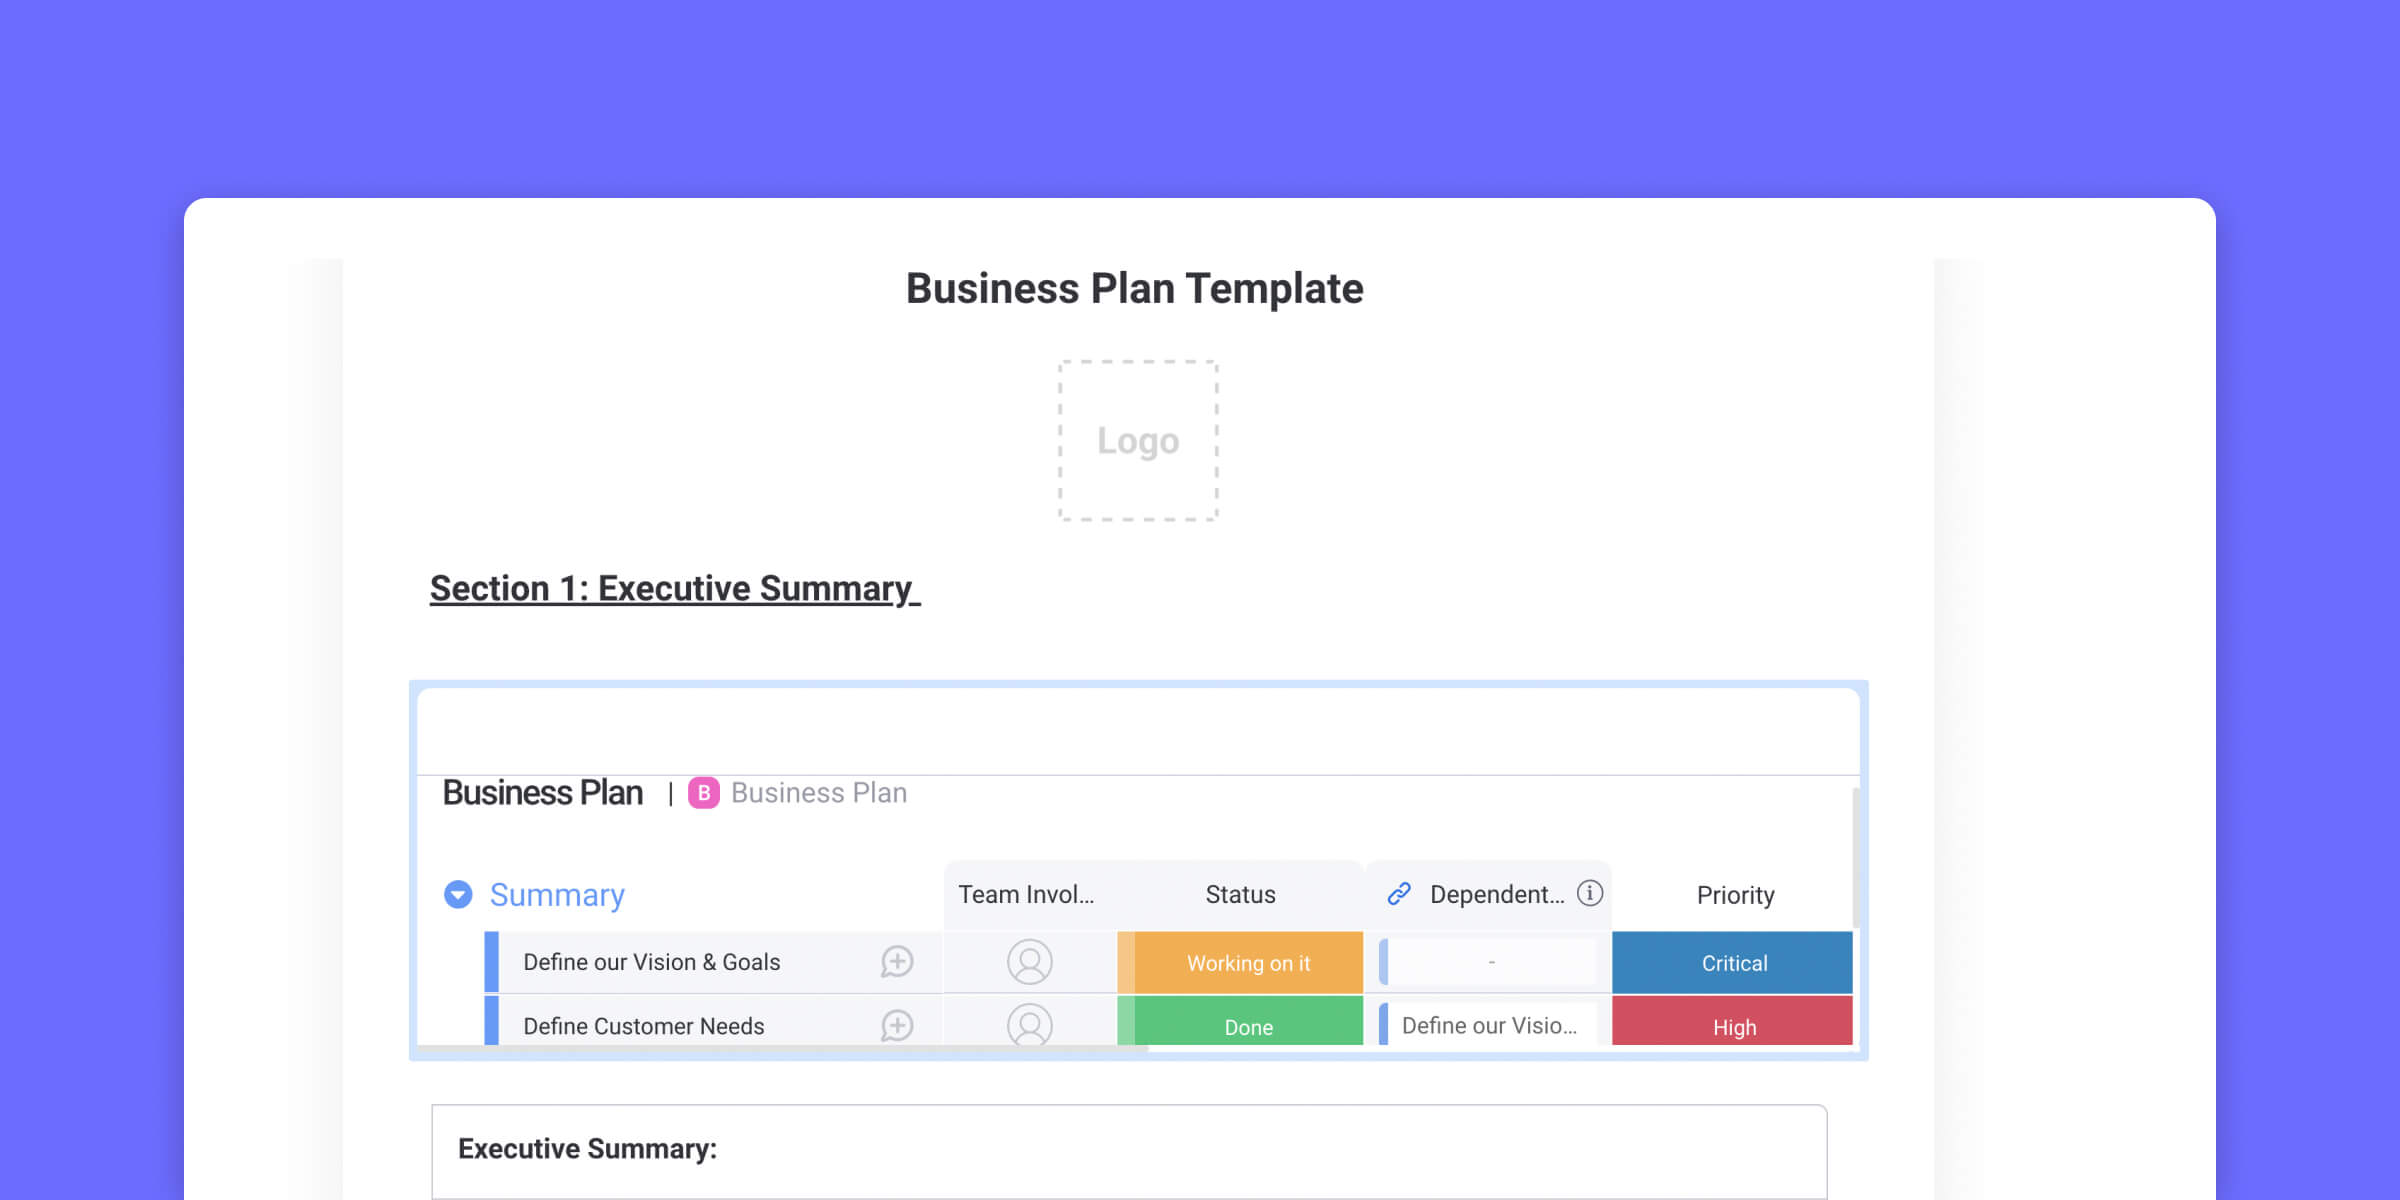 Boutique business plan: 7 sections to include